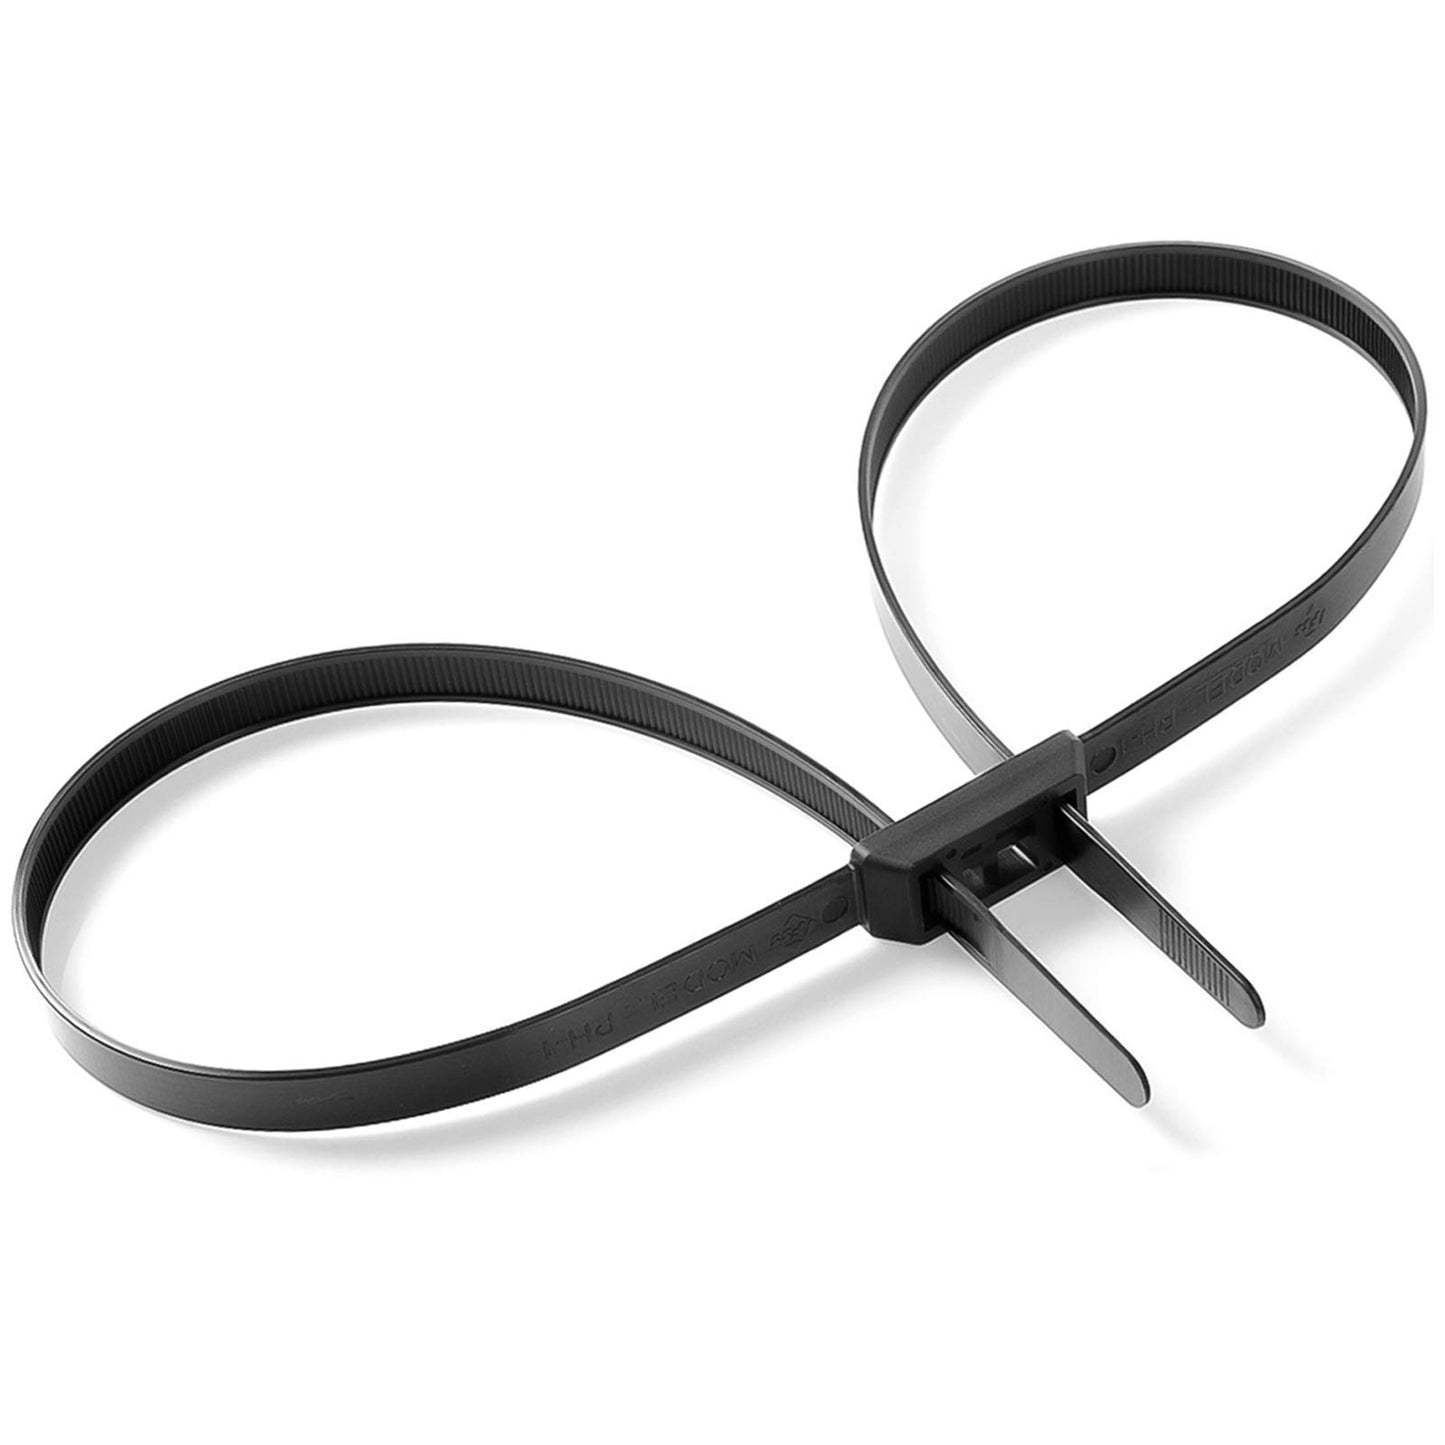 12 x 700mm Handcuff Cable Ties